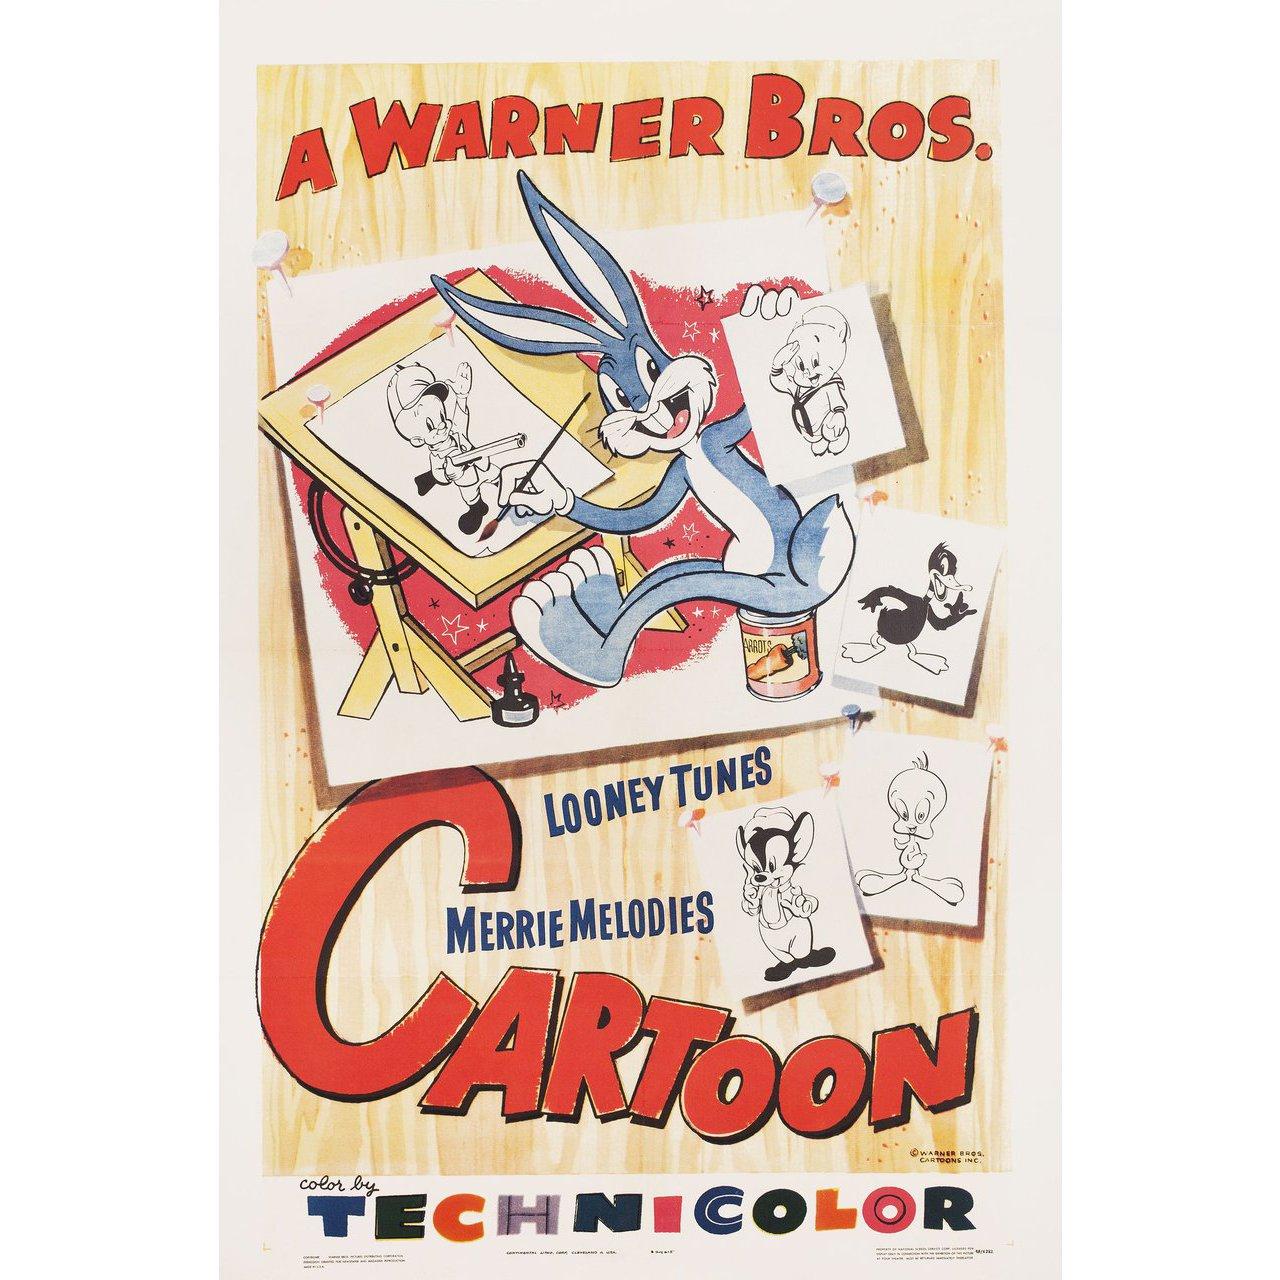 Original 1948 U.S. one sheet poster for the film Warner Bros Cartoon. Very Good-Fine condition, linen-backed. This poster has been professionally linen-backed. Please note: the size is stated in inches and the actual size can vary by an inch or more.